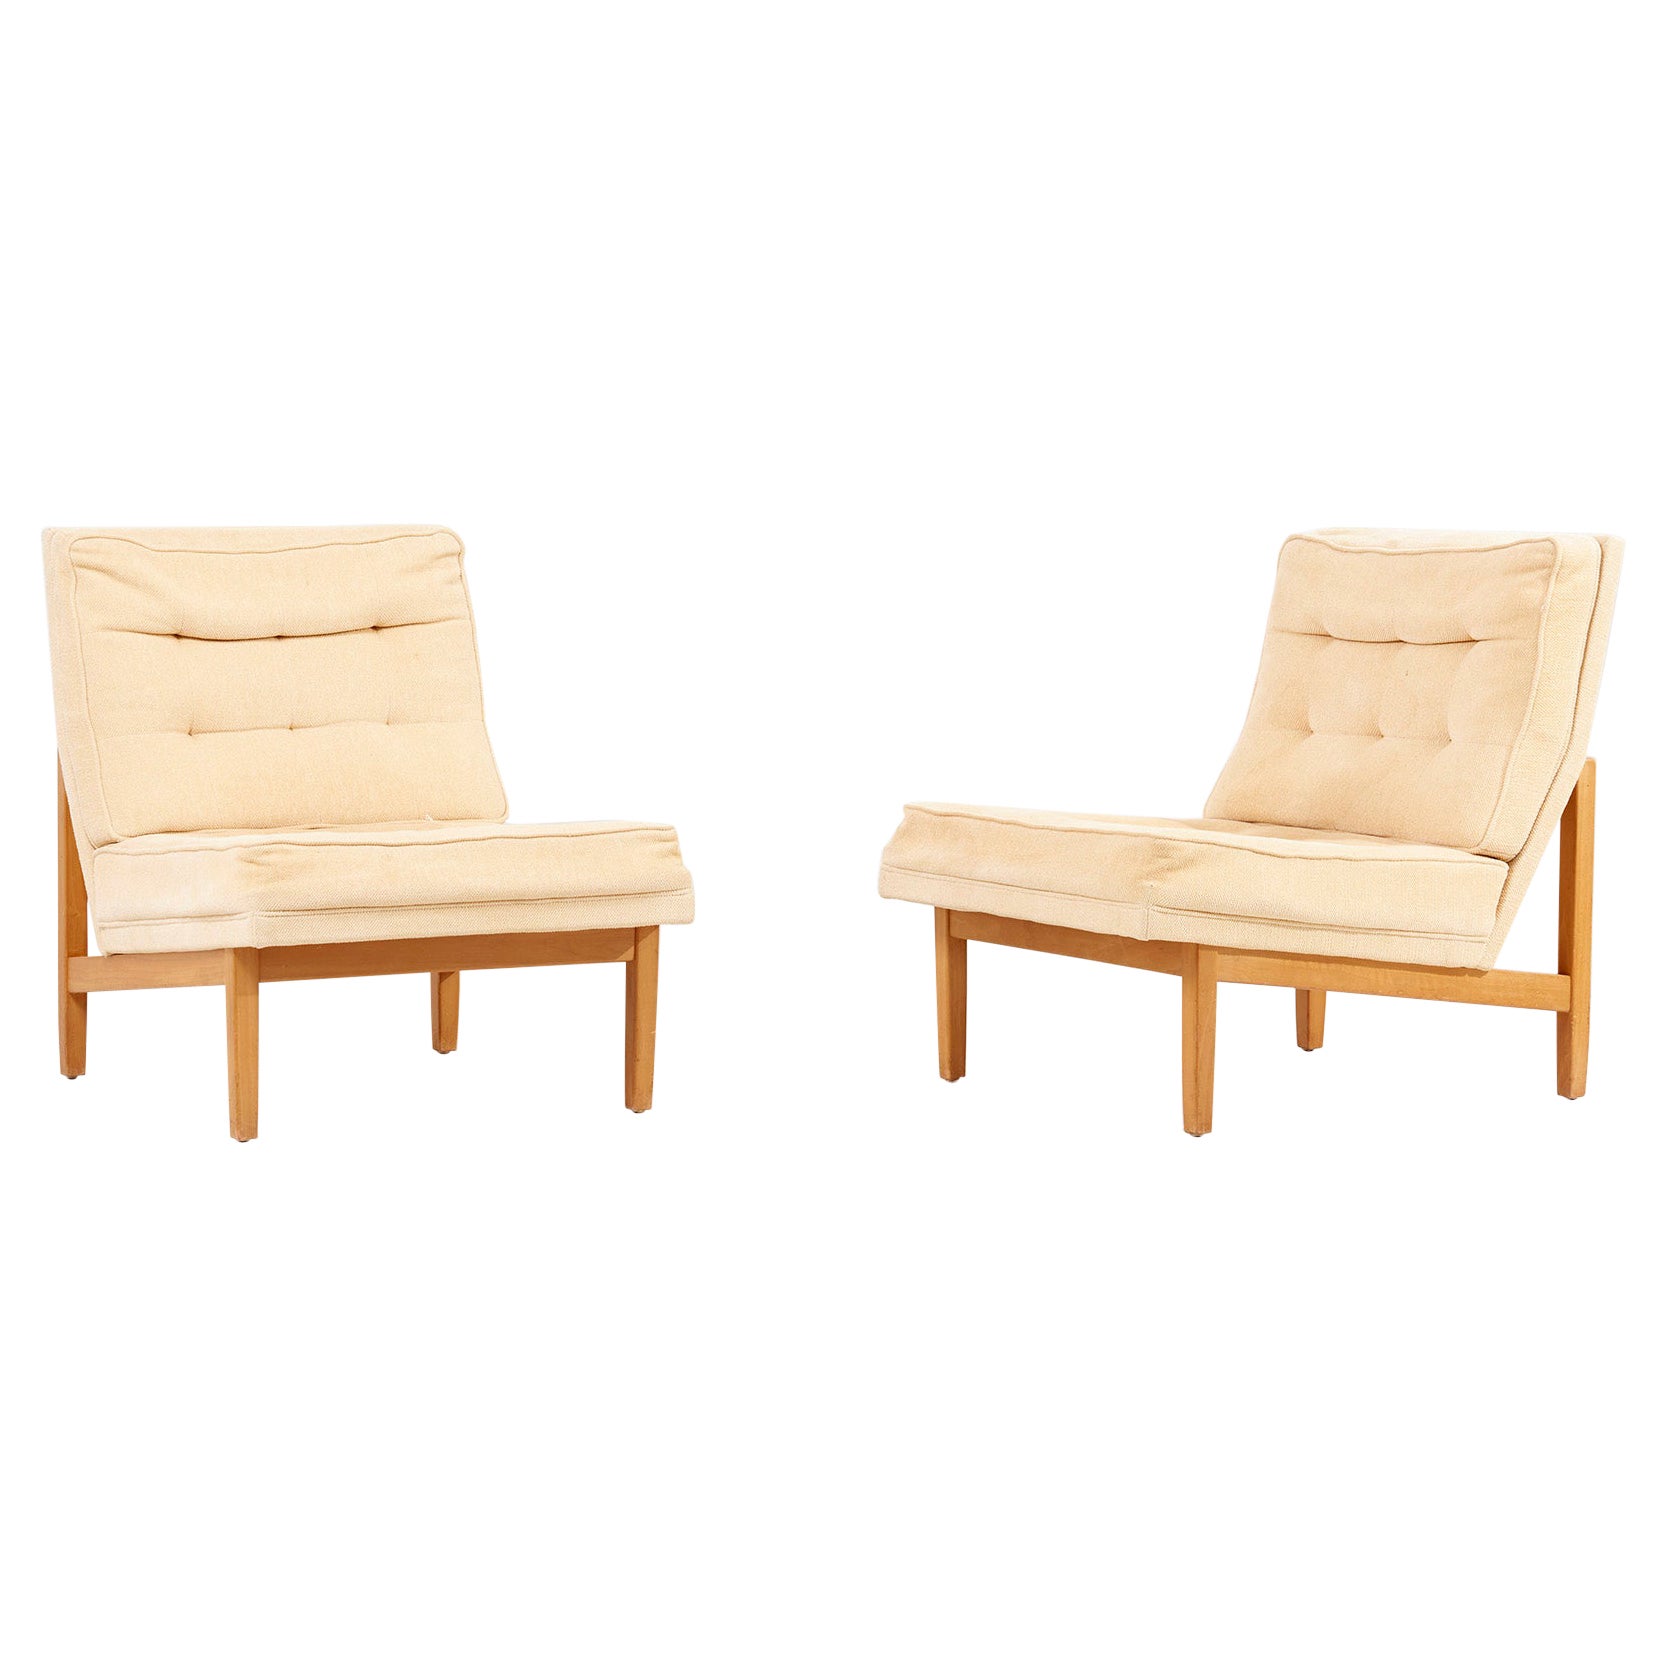 Pair of beige 51W Florence Knoll Lounge Chairs by Knoll Associates, USA, 1950s